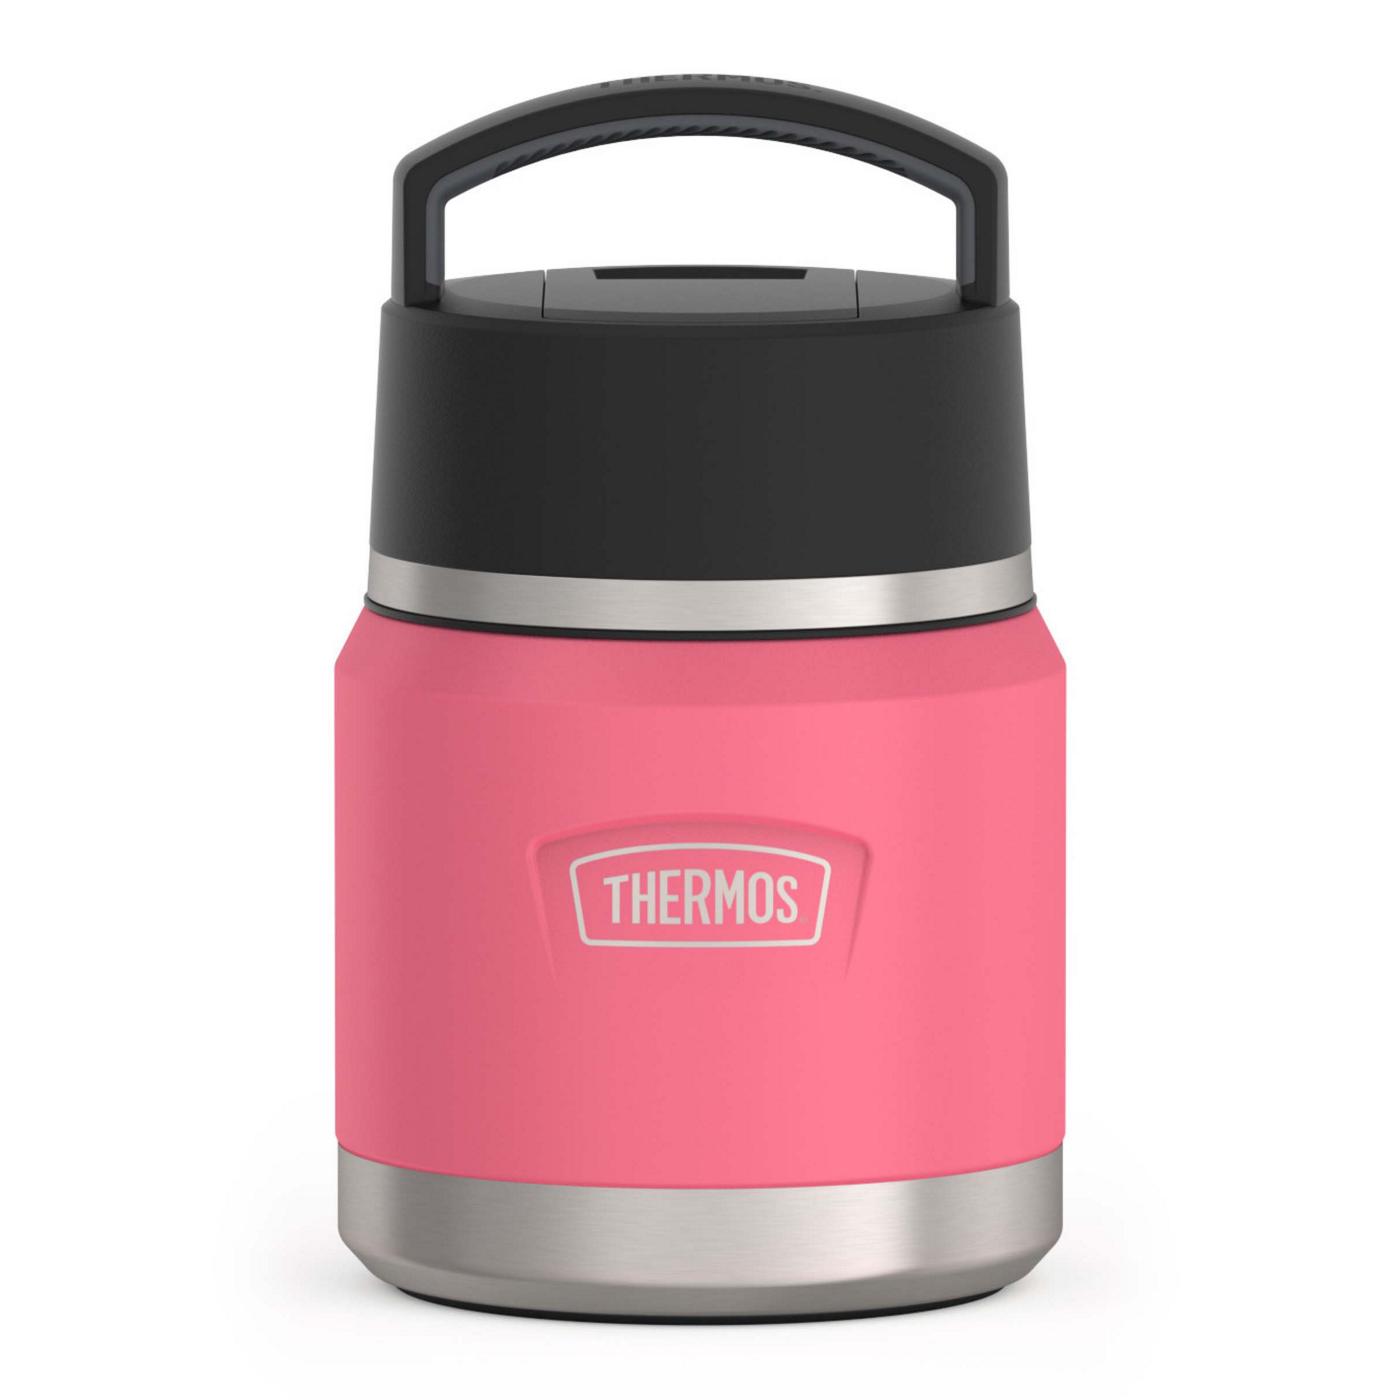 Thermos Icon Series Food Jar - Pink; image 1 of 6